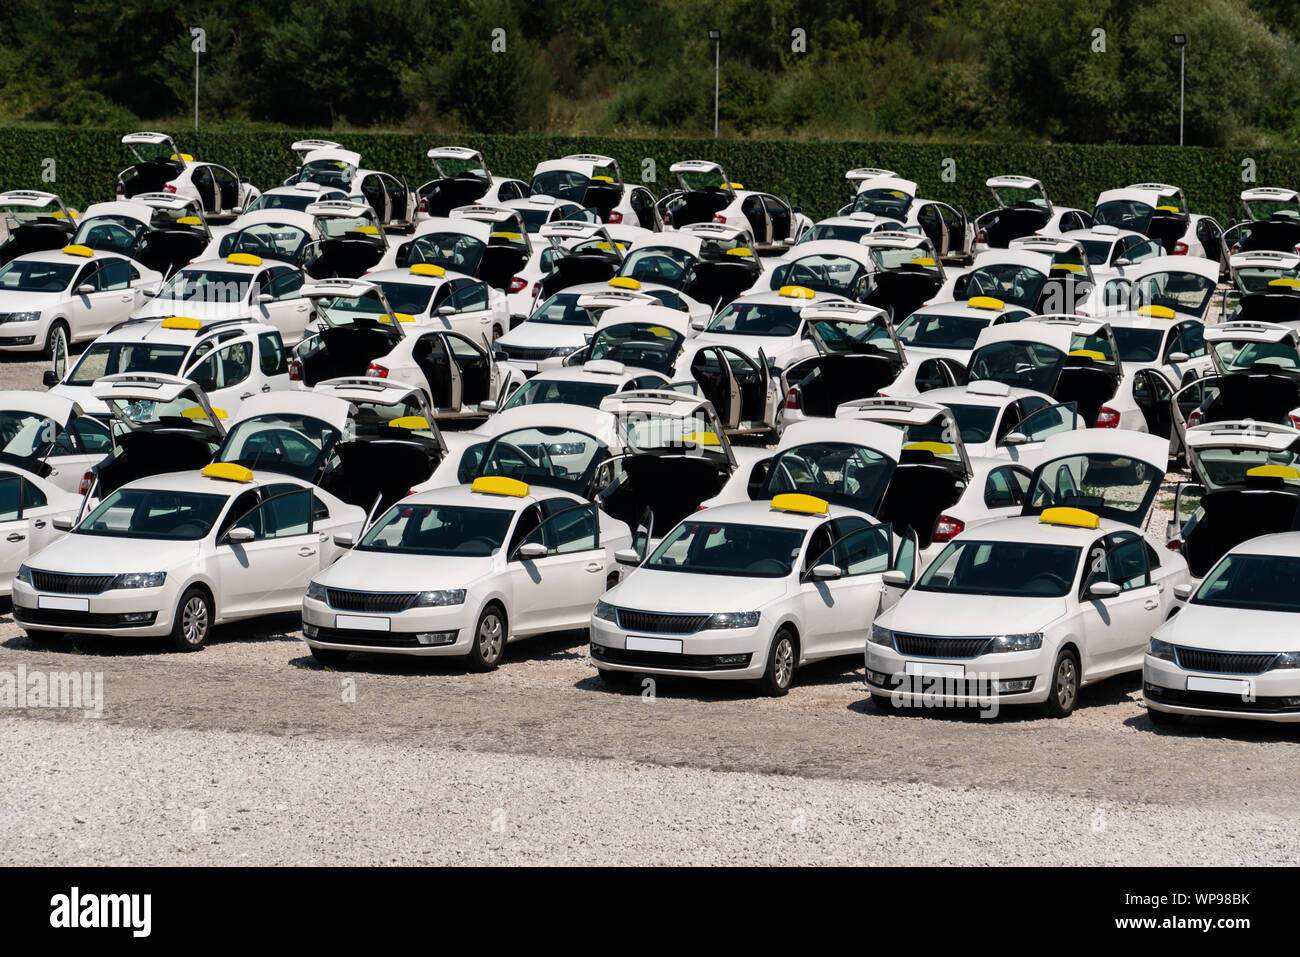 Many taxi cars stand in rows in a parking lot. Stock Photo